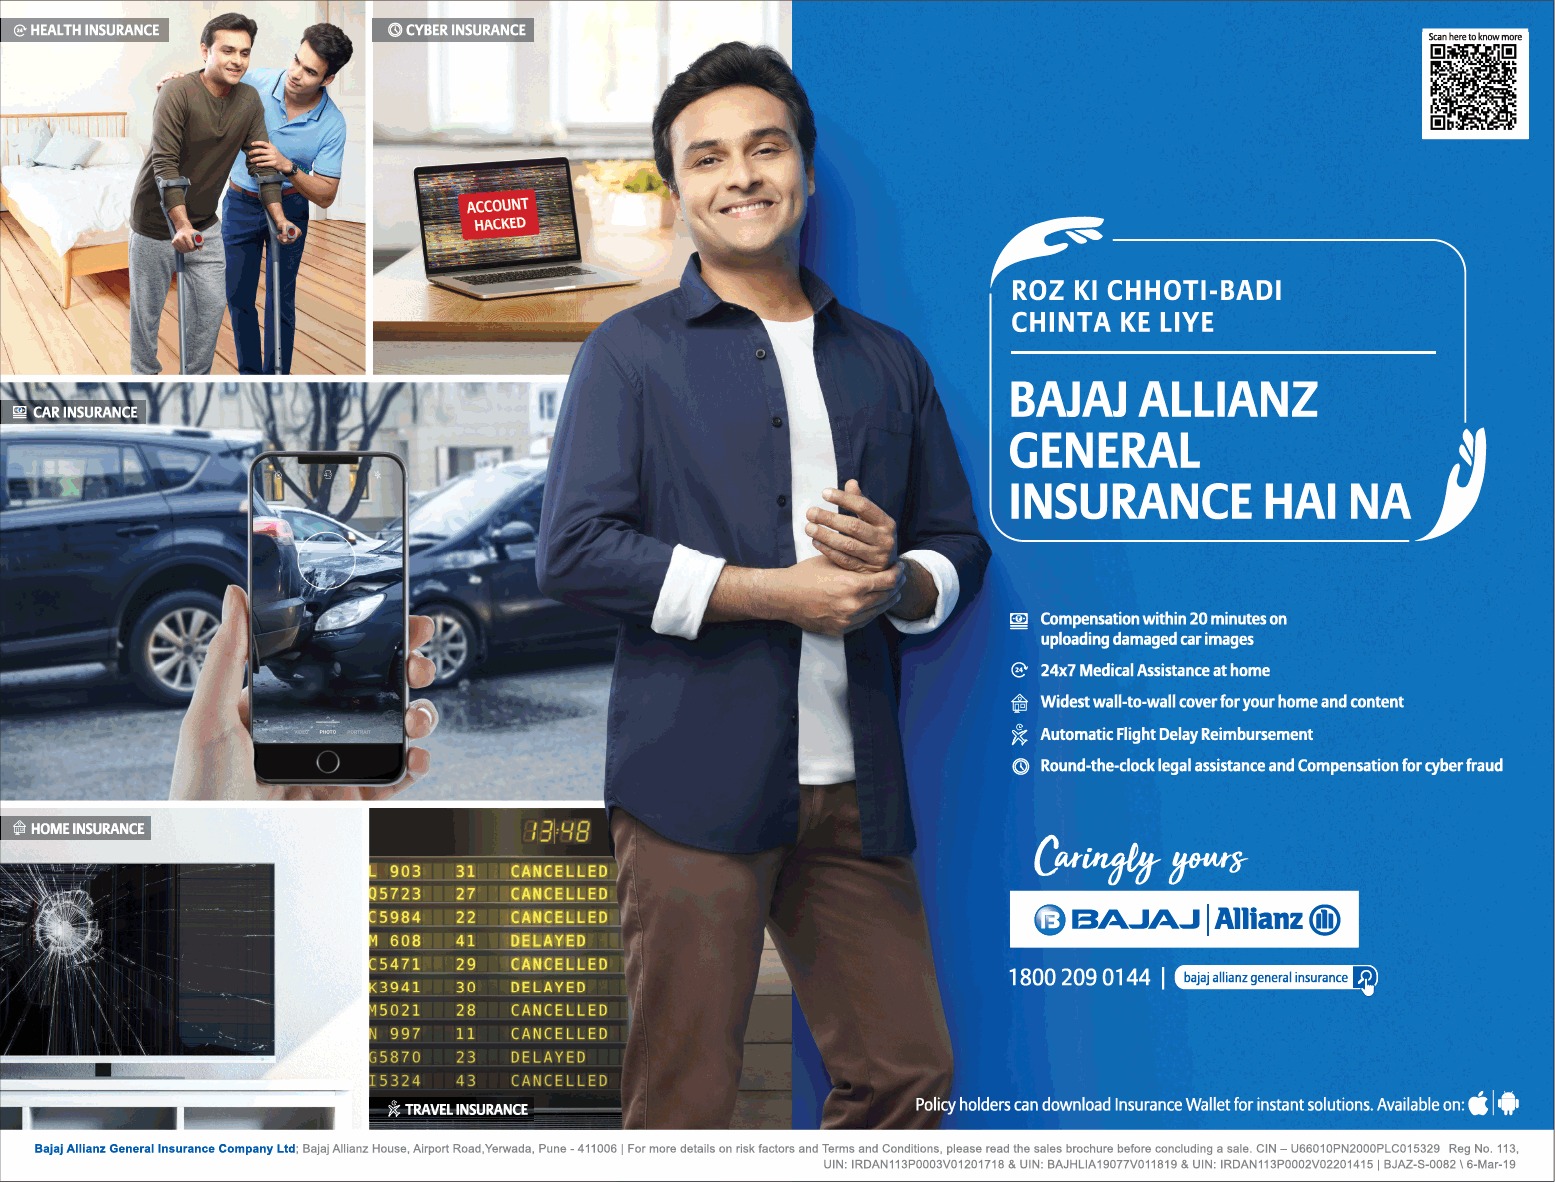 bajaj-allianz-general-insurance-ad-times-of-india-hyderabad-26-03-2019.png